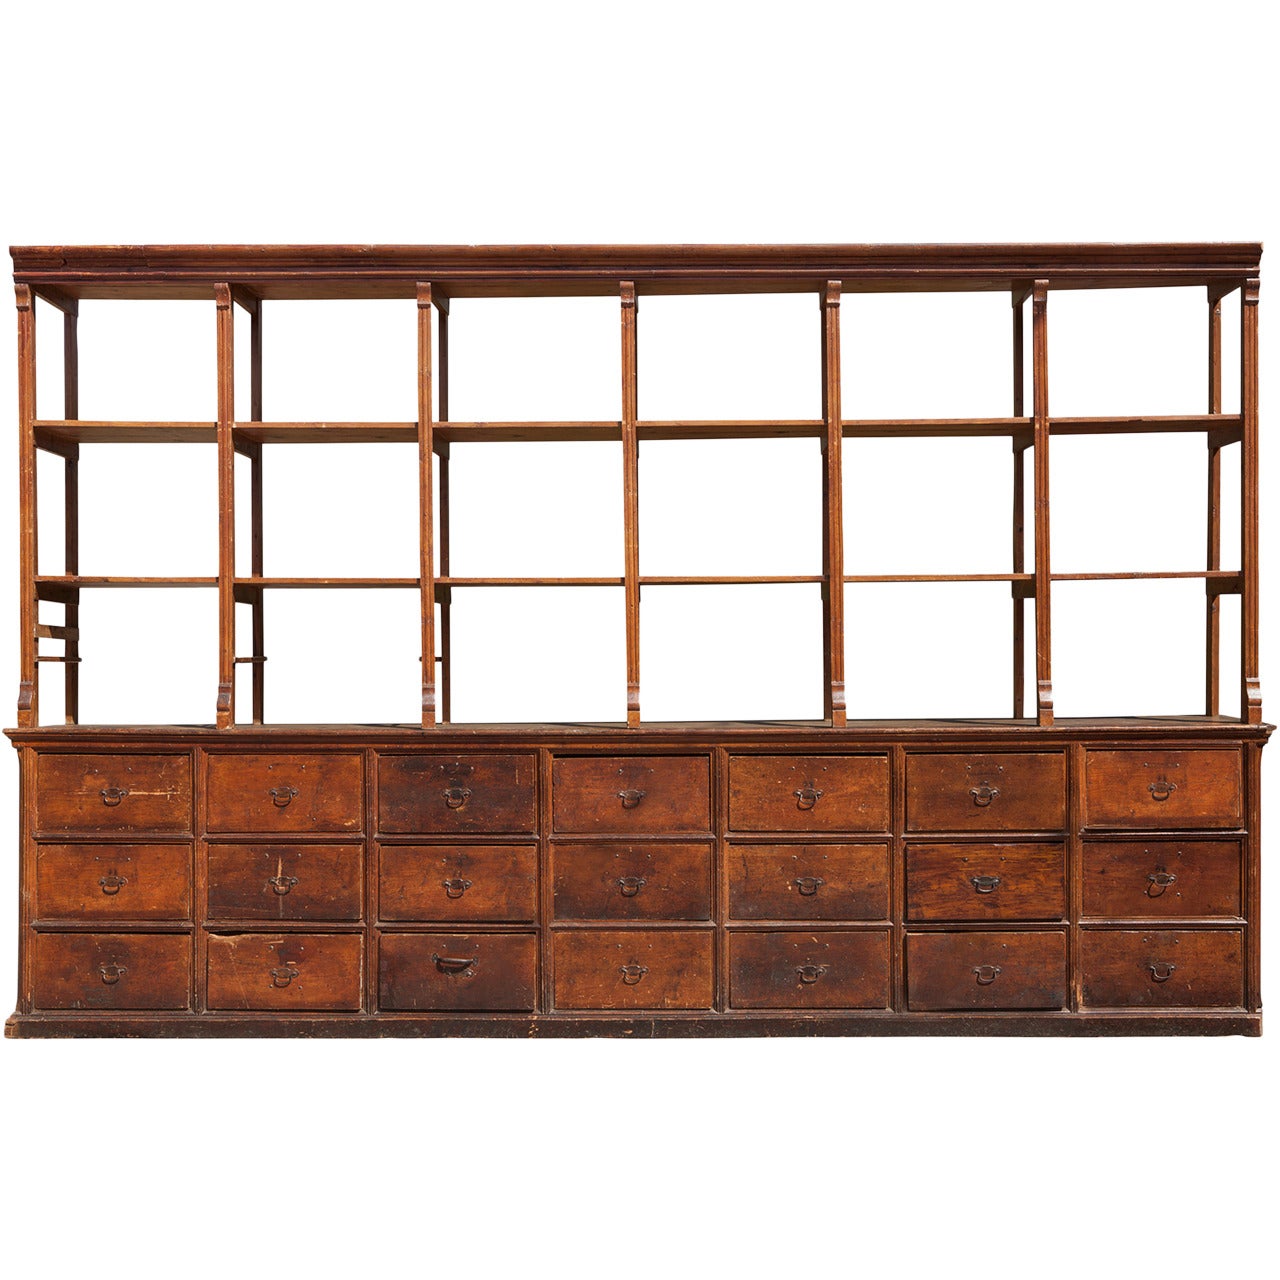 Monumental Haberdashery Shelving Unit with Chest of Drawers